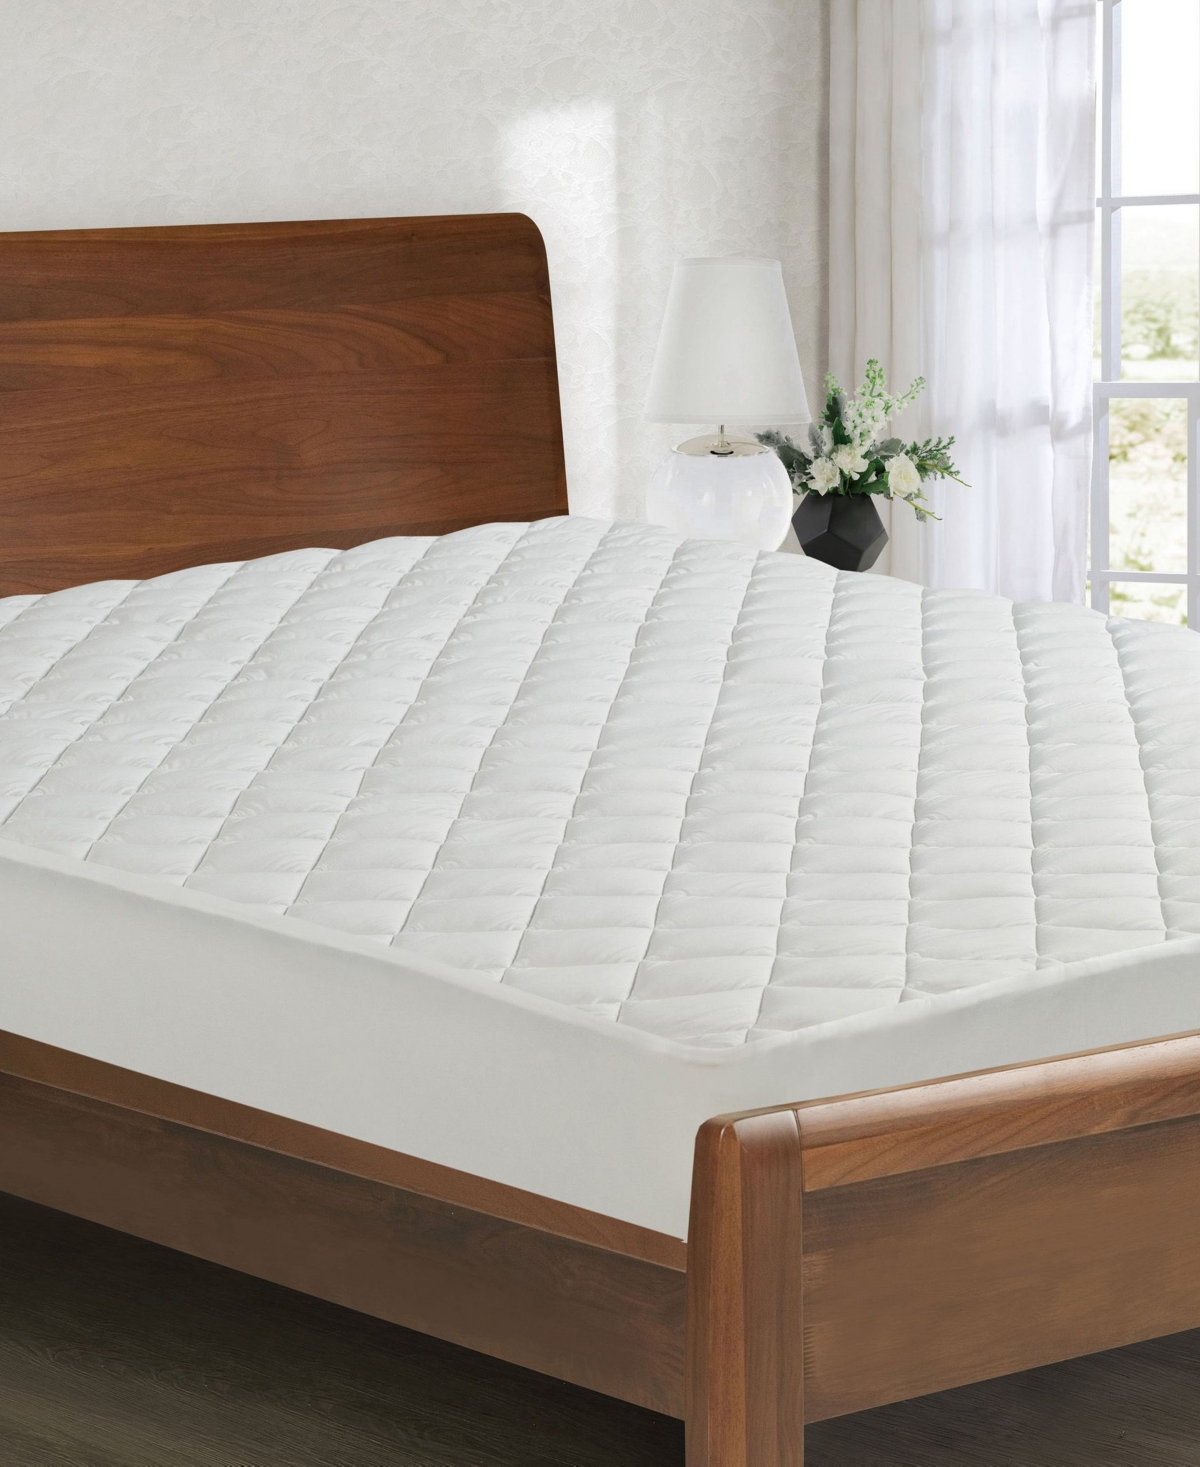 All-In-One Performance Stretch Moisture Wicking Fitted Mattress Pad, Full